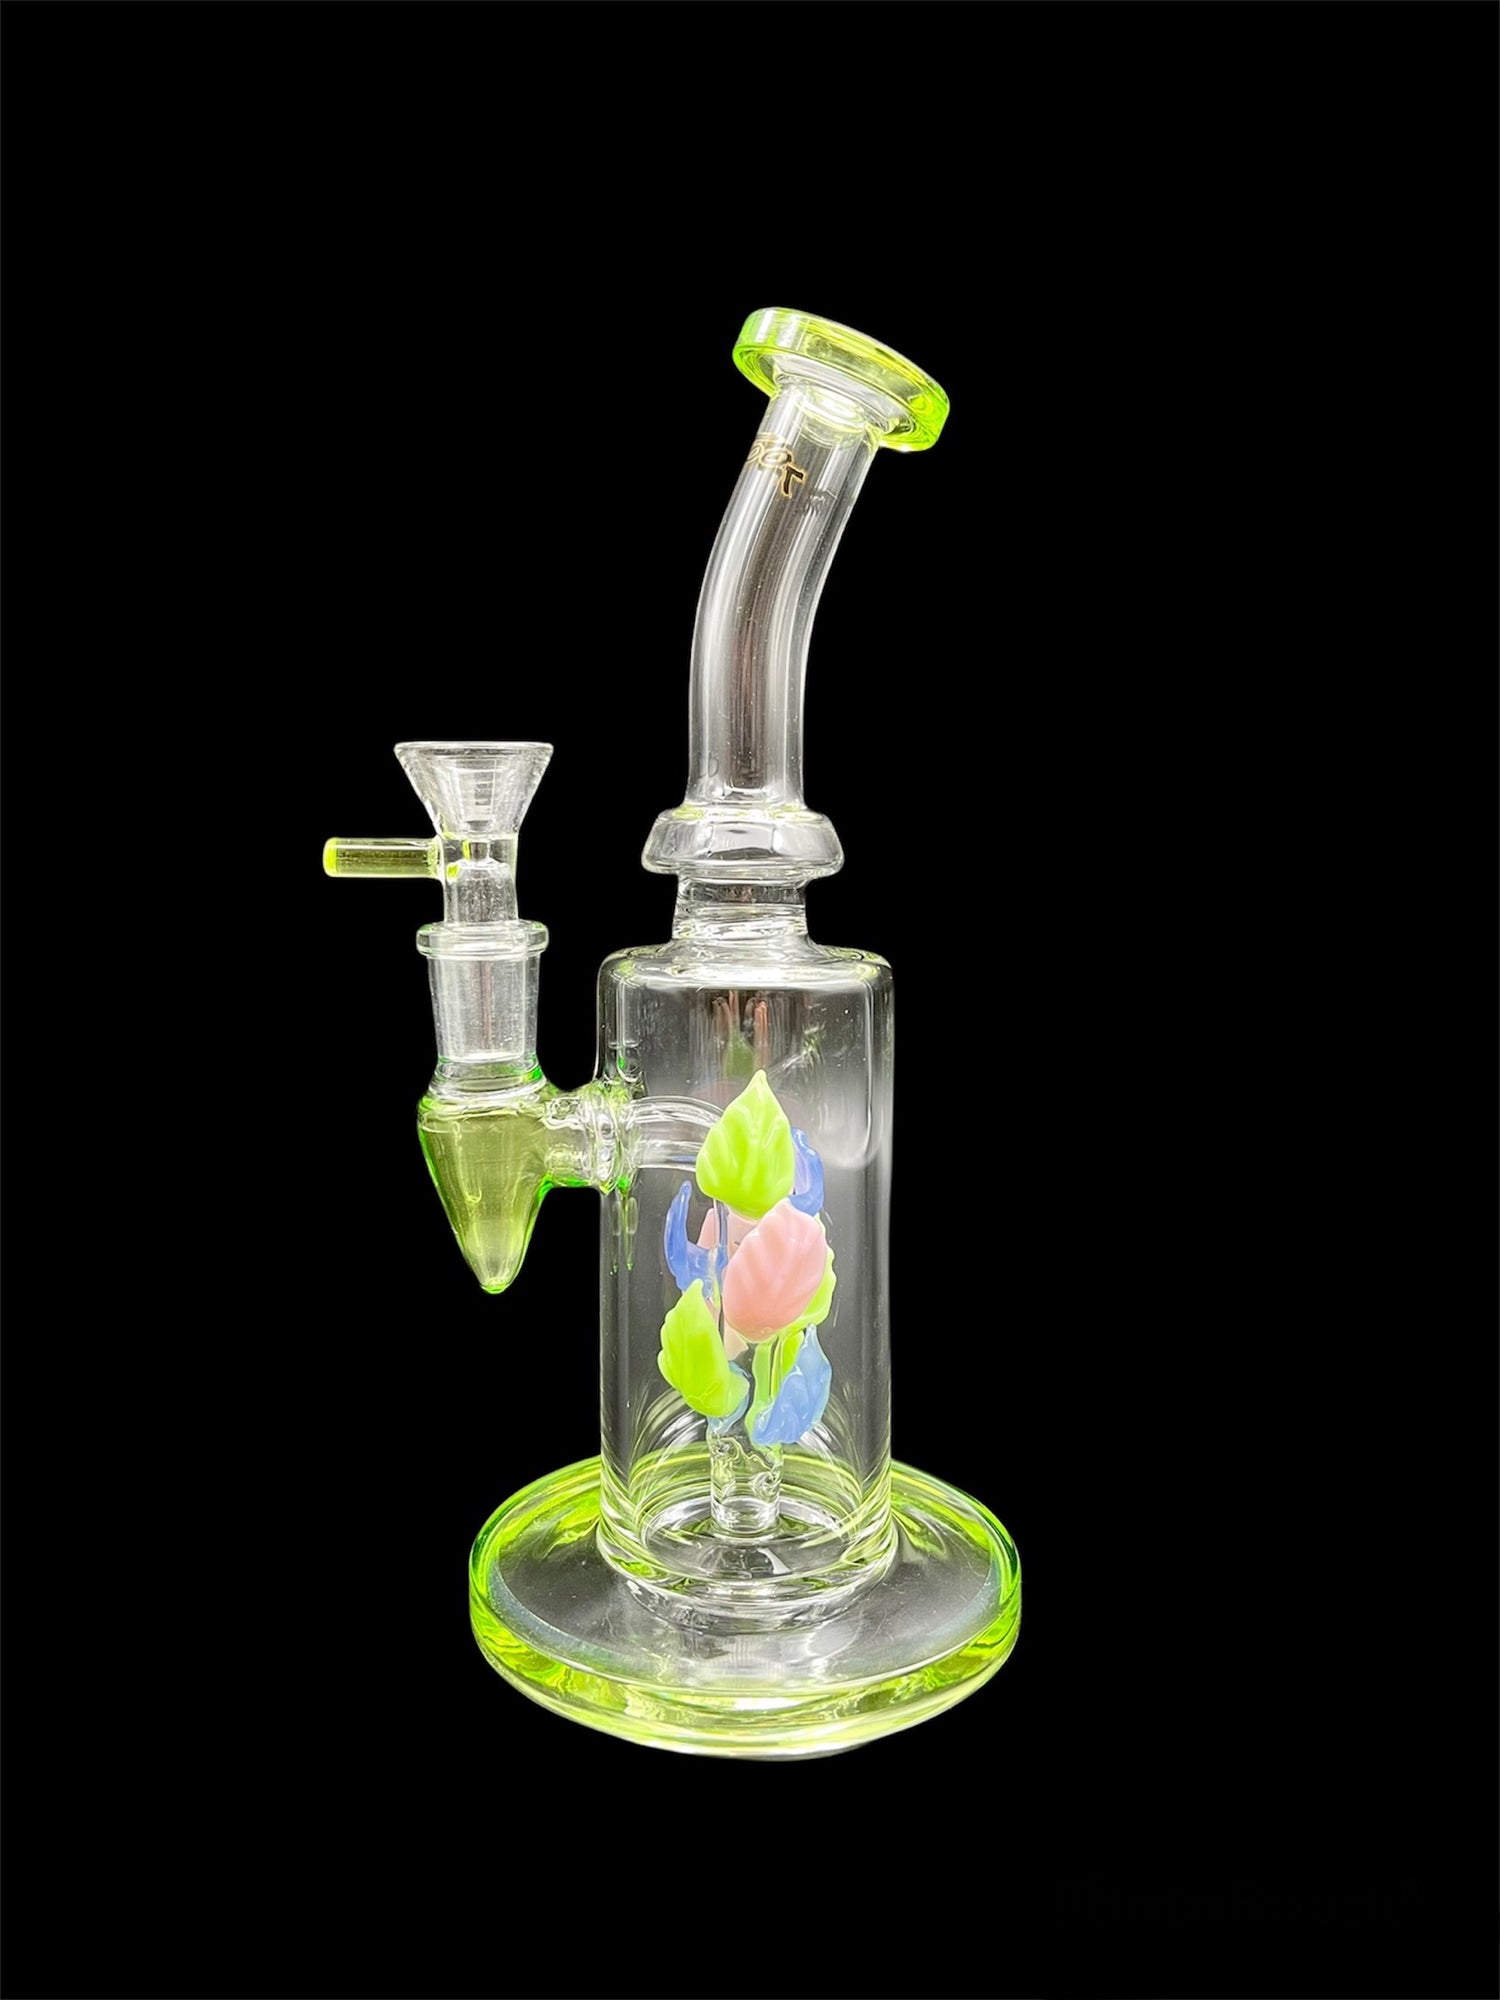 Why Is Borosilicate Glass Best For Bongs?